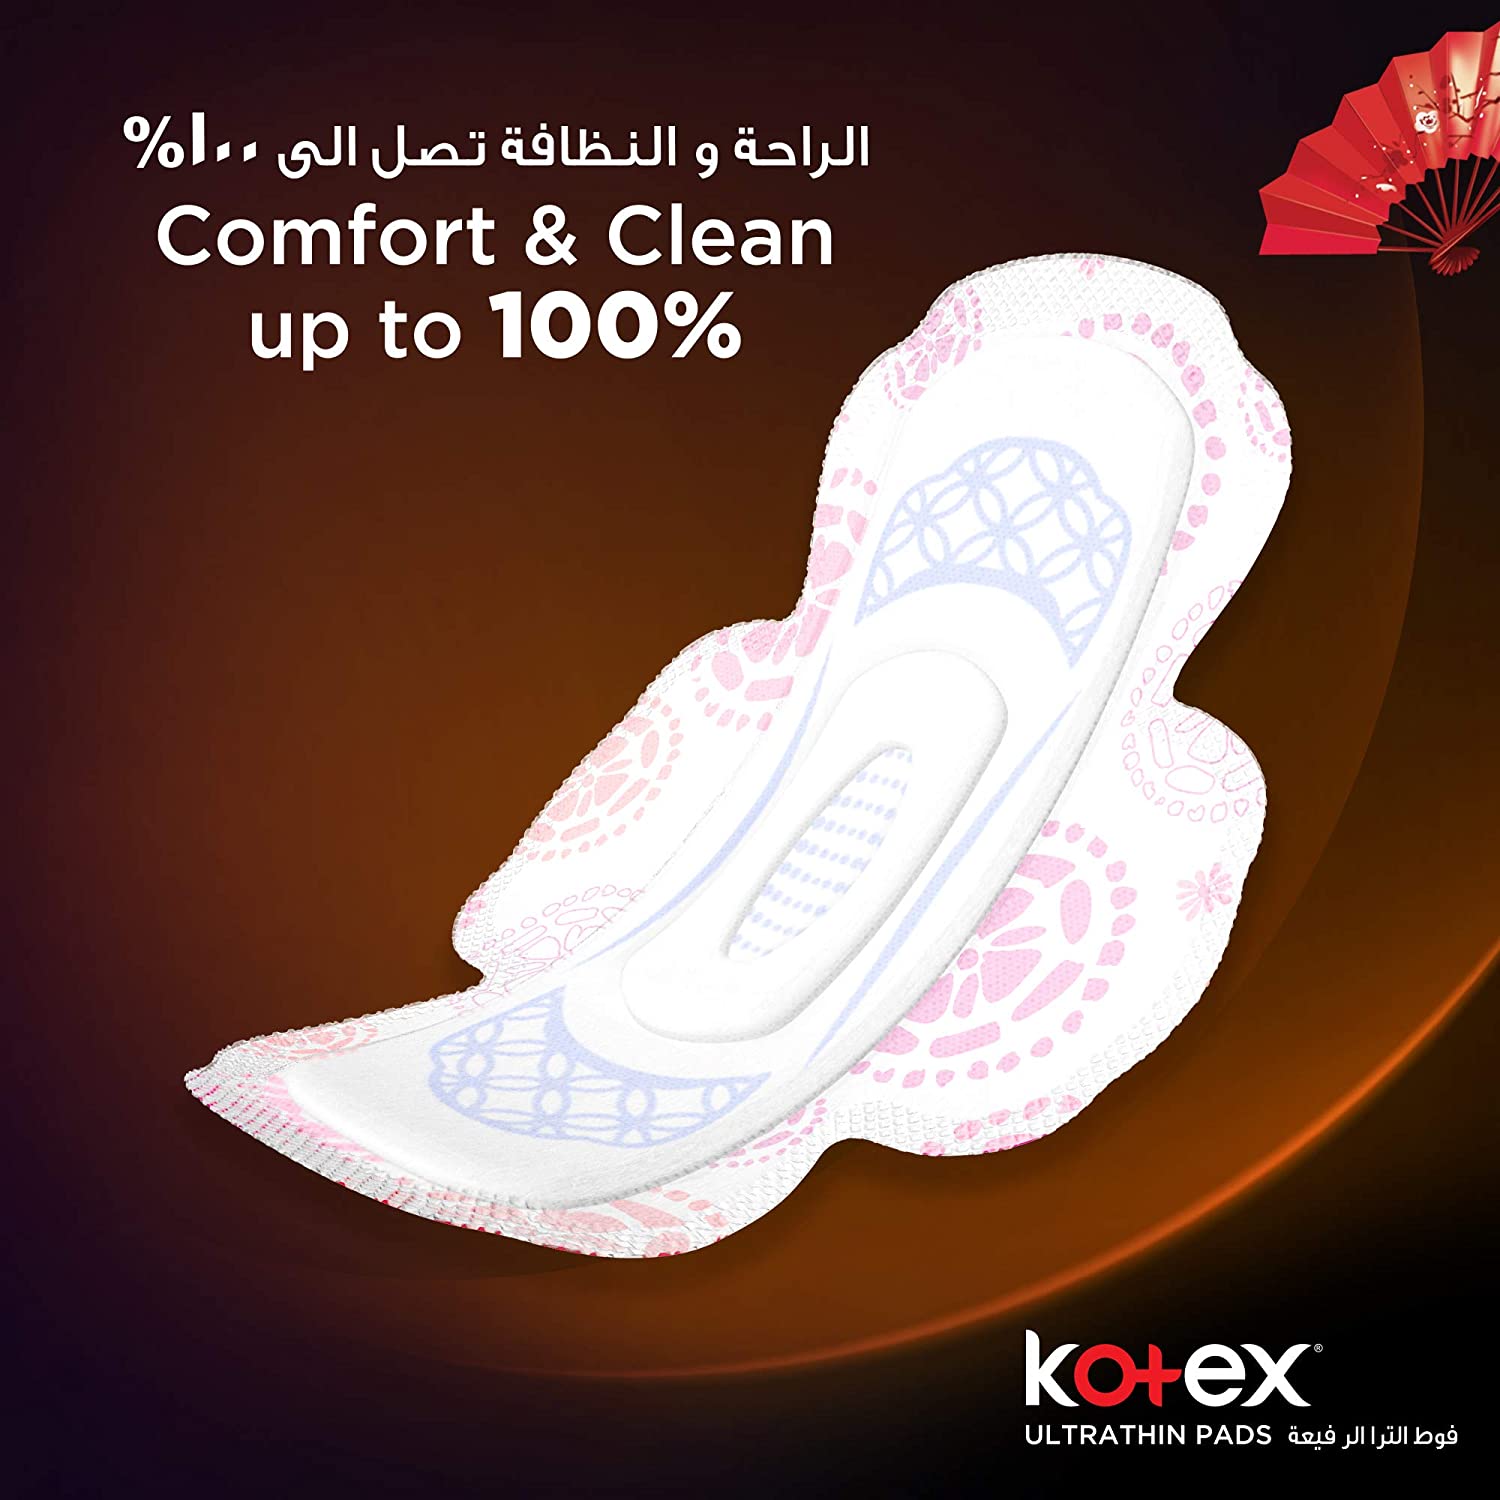 Kotex Natural Ultra Thin Pads, 100% Cotton Pad, Super Size Sanitary Pads with Wings, 16 Sanitary Pads